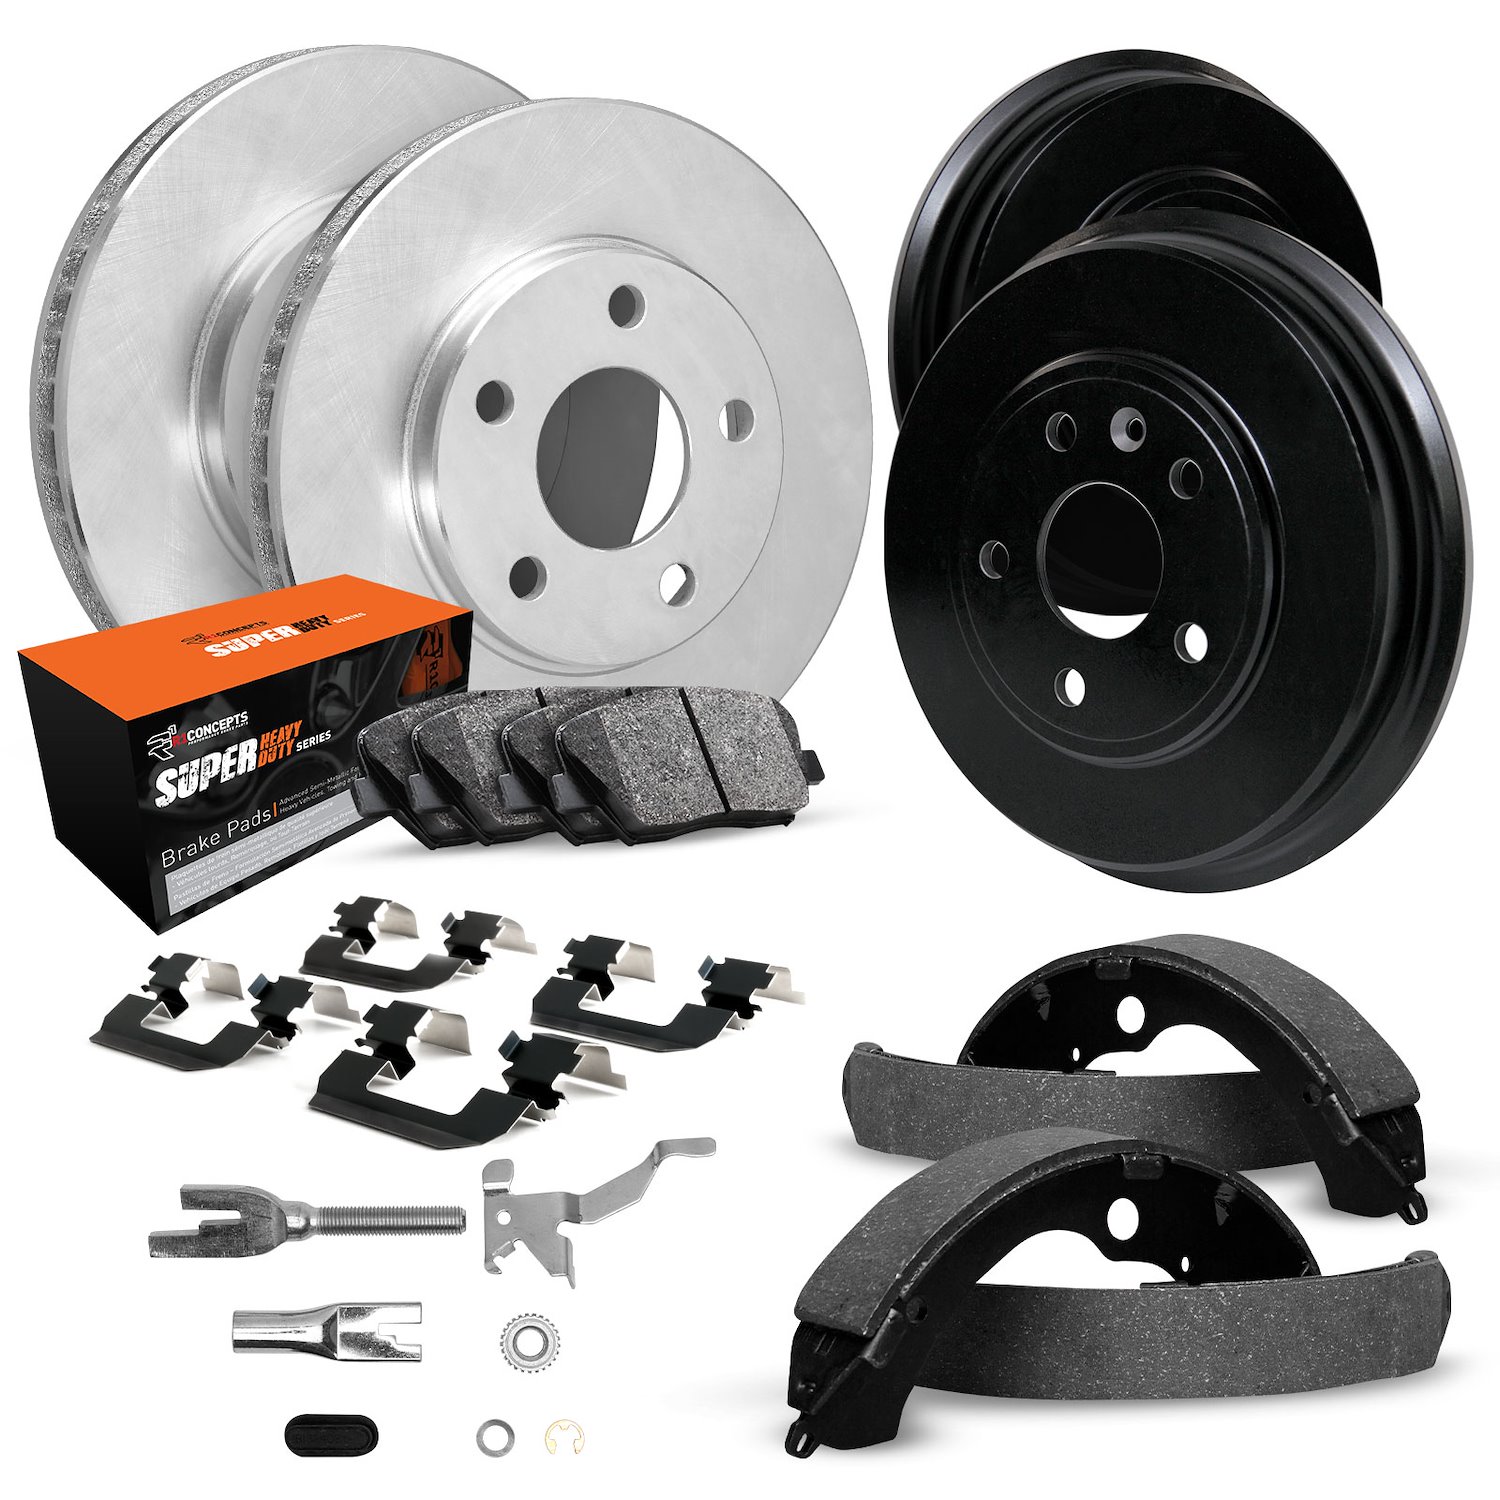 E-Line Blank Brake Rotor & Drum Set w/Super-Duty Pads, Shoes, Hardware, & Adjusters, 1980-1989 Ford/Lincoln/Mercury/Mazda